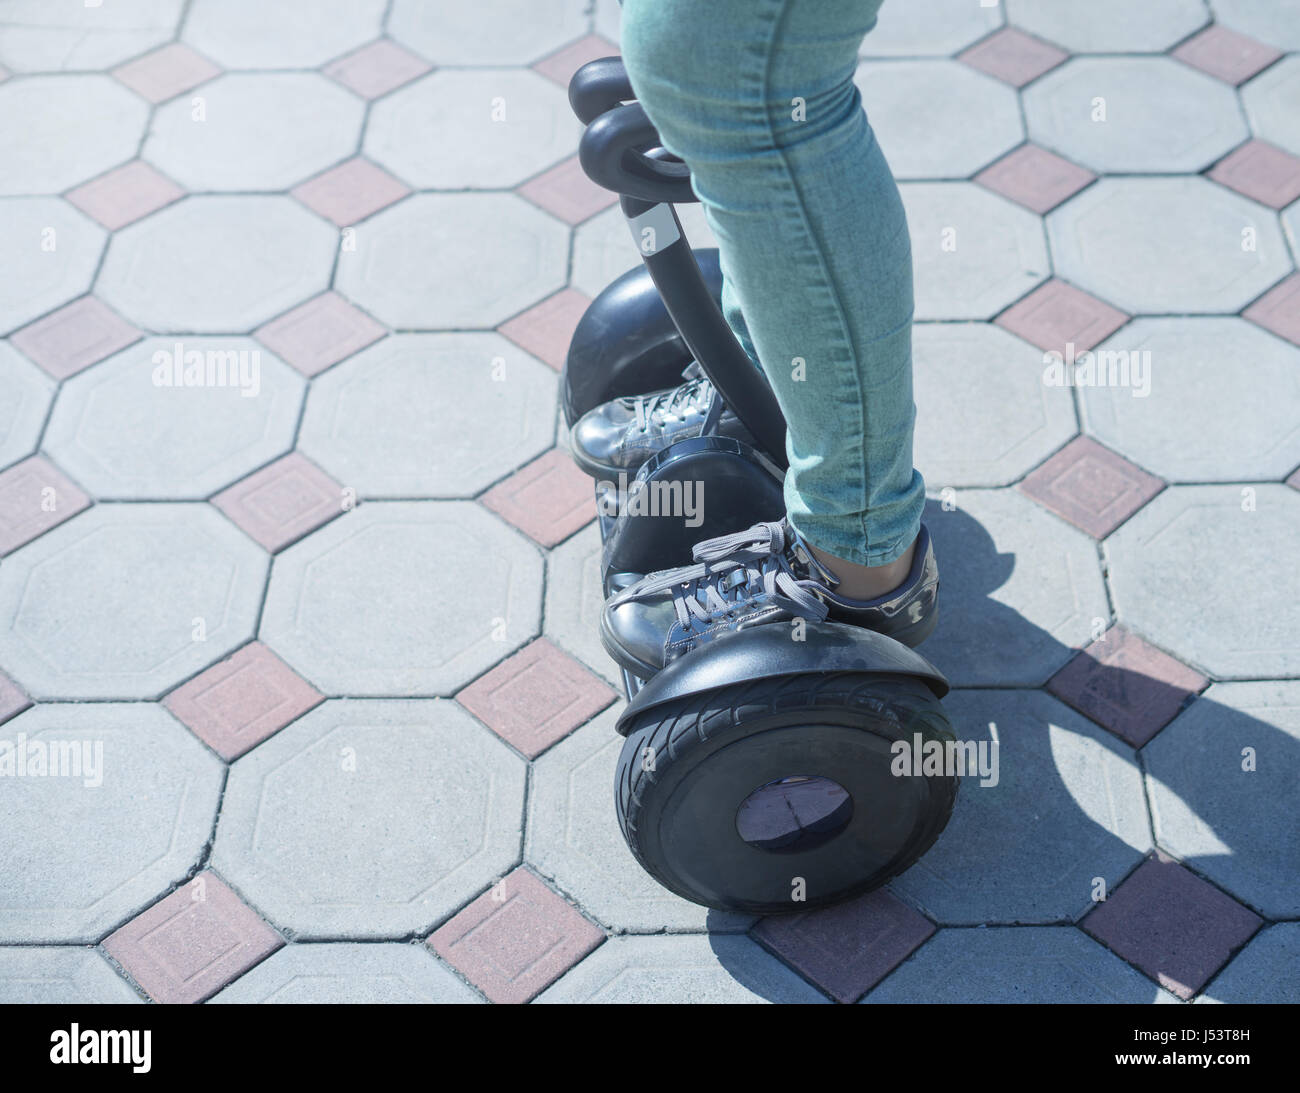 woman legs ride gyroscooter or hoverboard Stock Photo